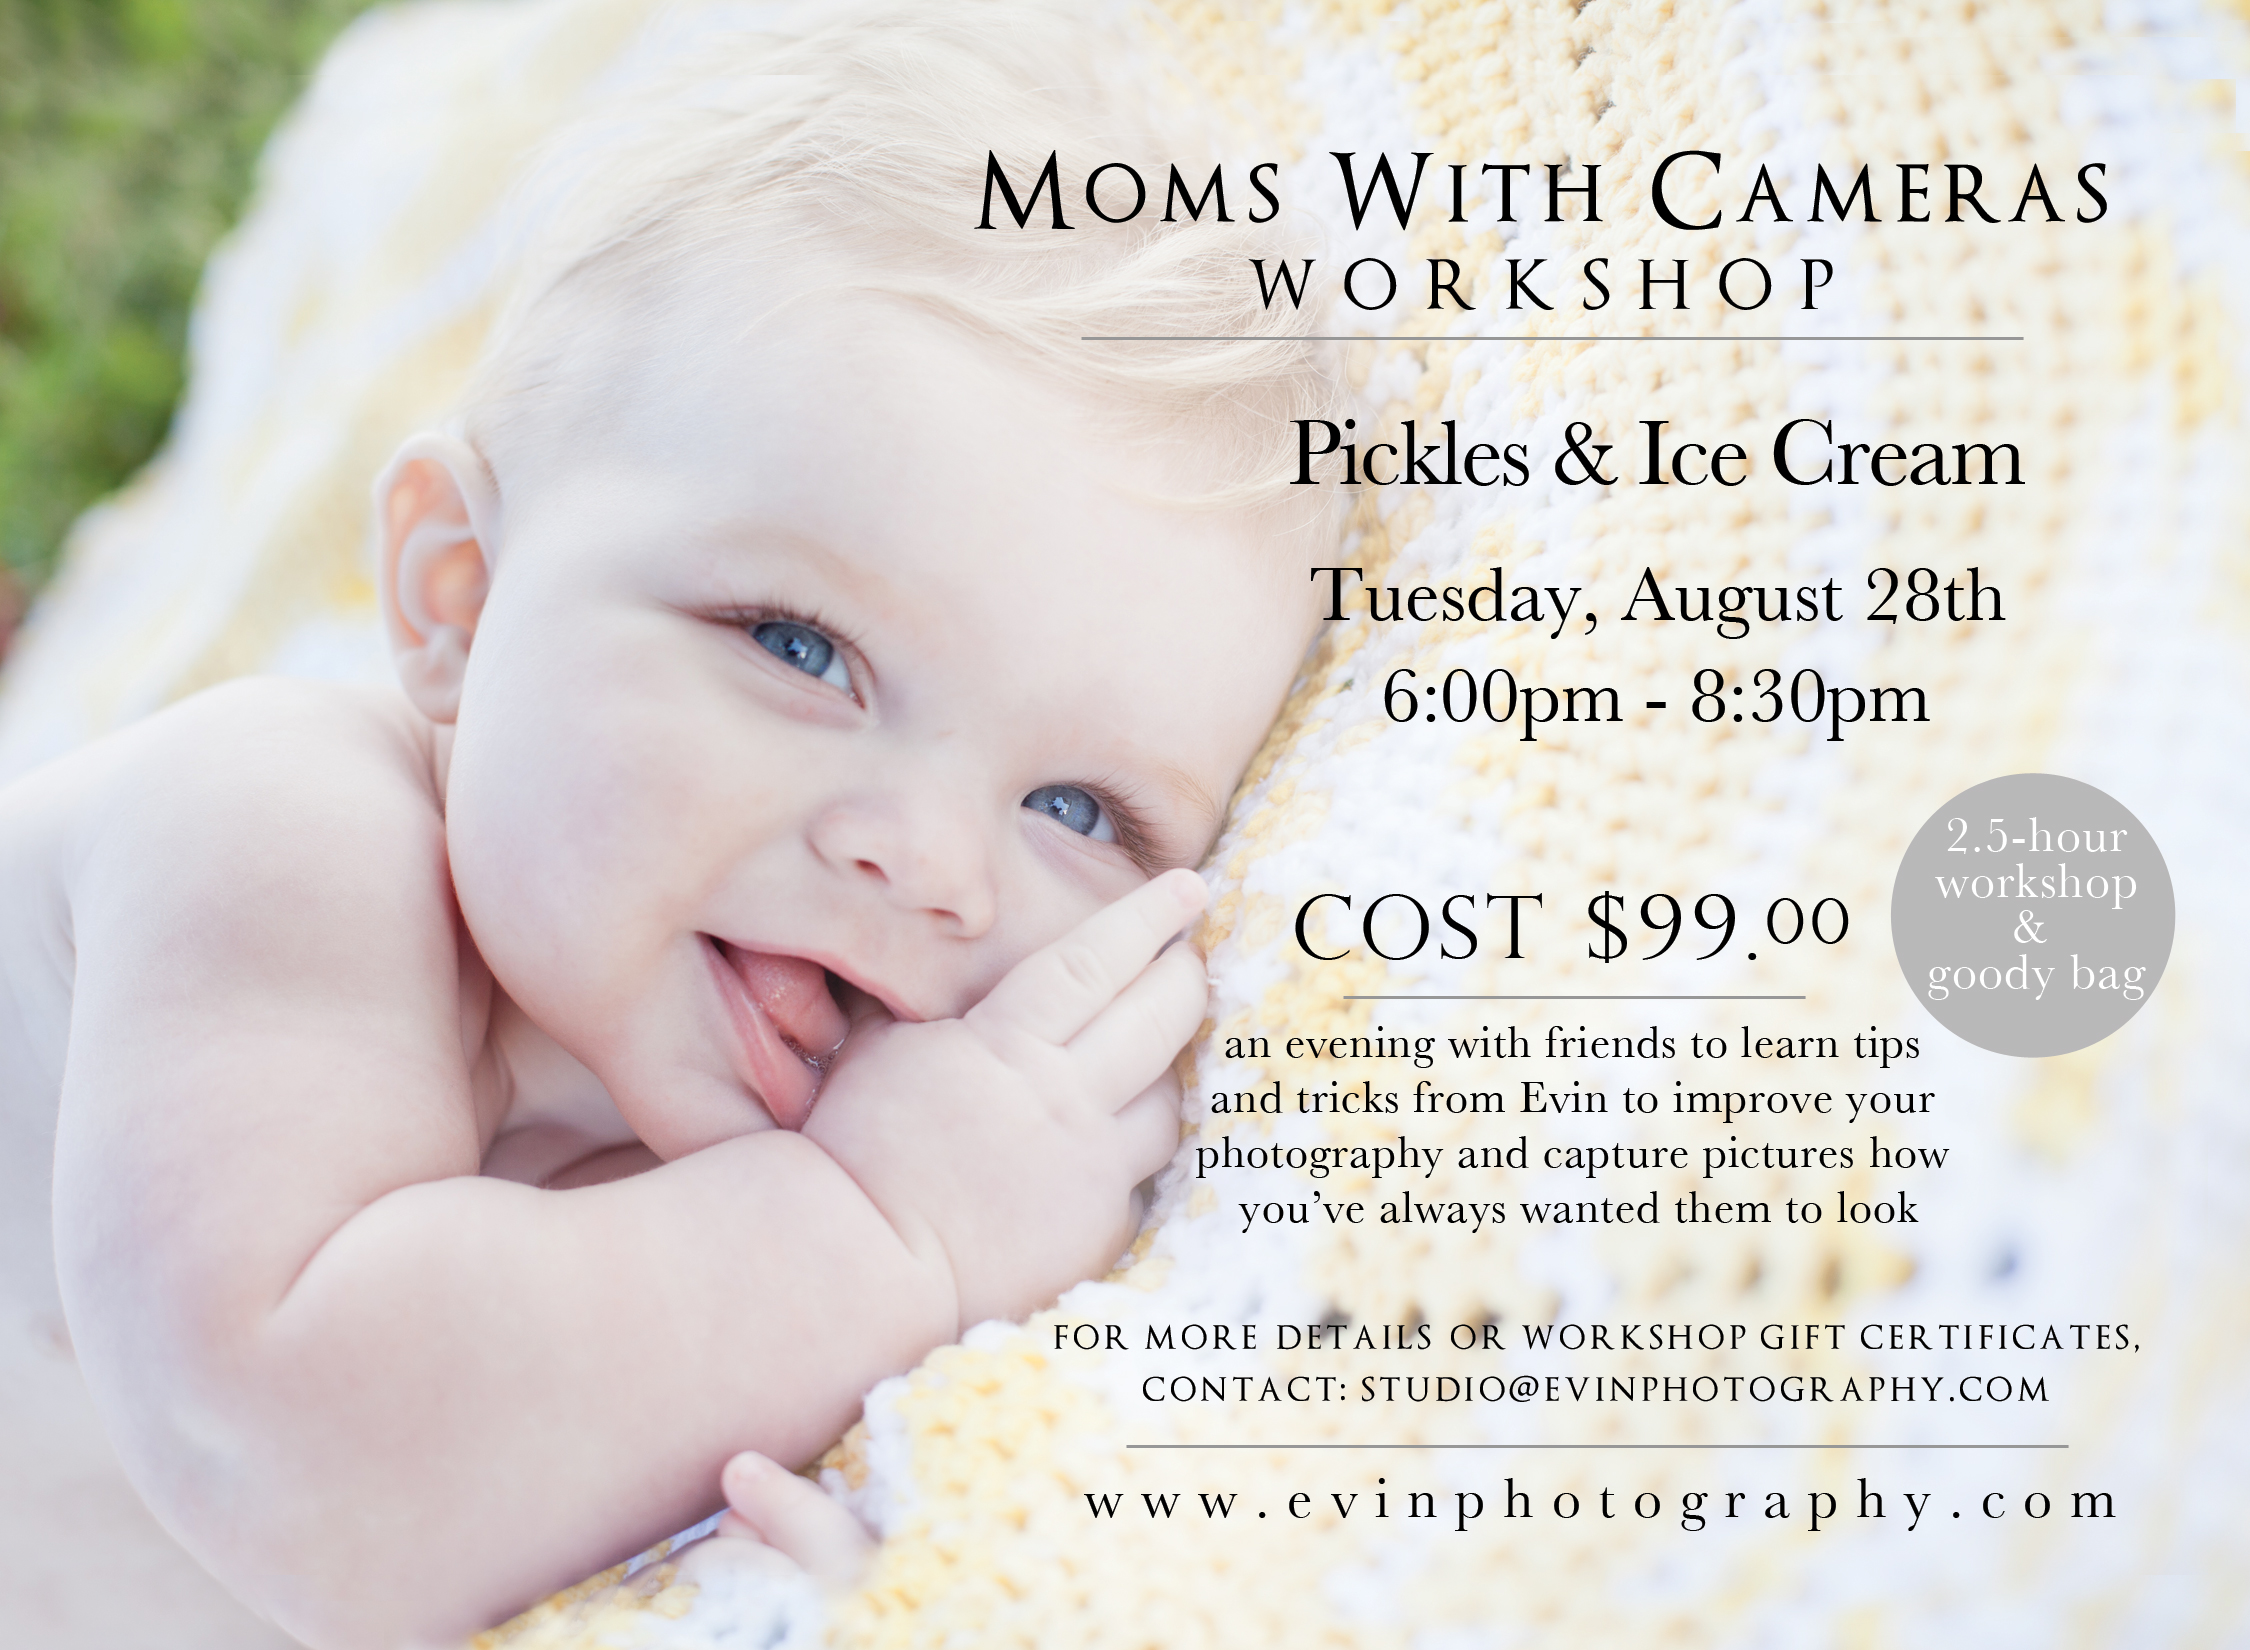 Moms With Cameras Workshop in Nashville TN at Pickles and Ice Cream by Evin Photography